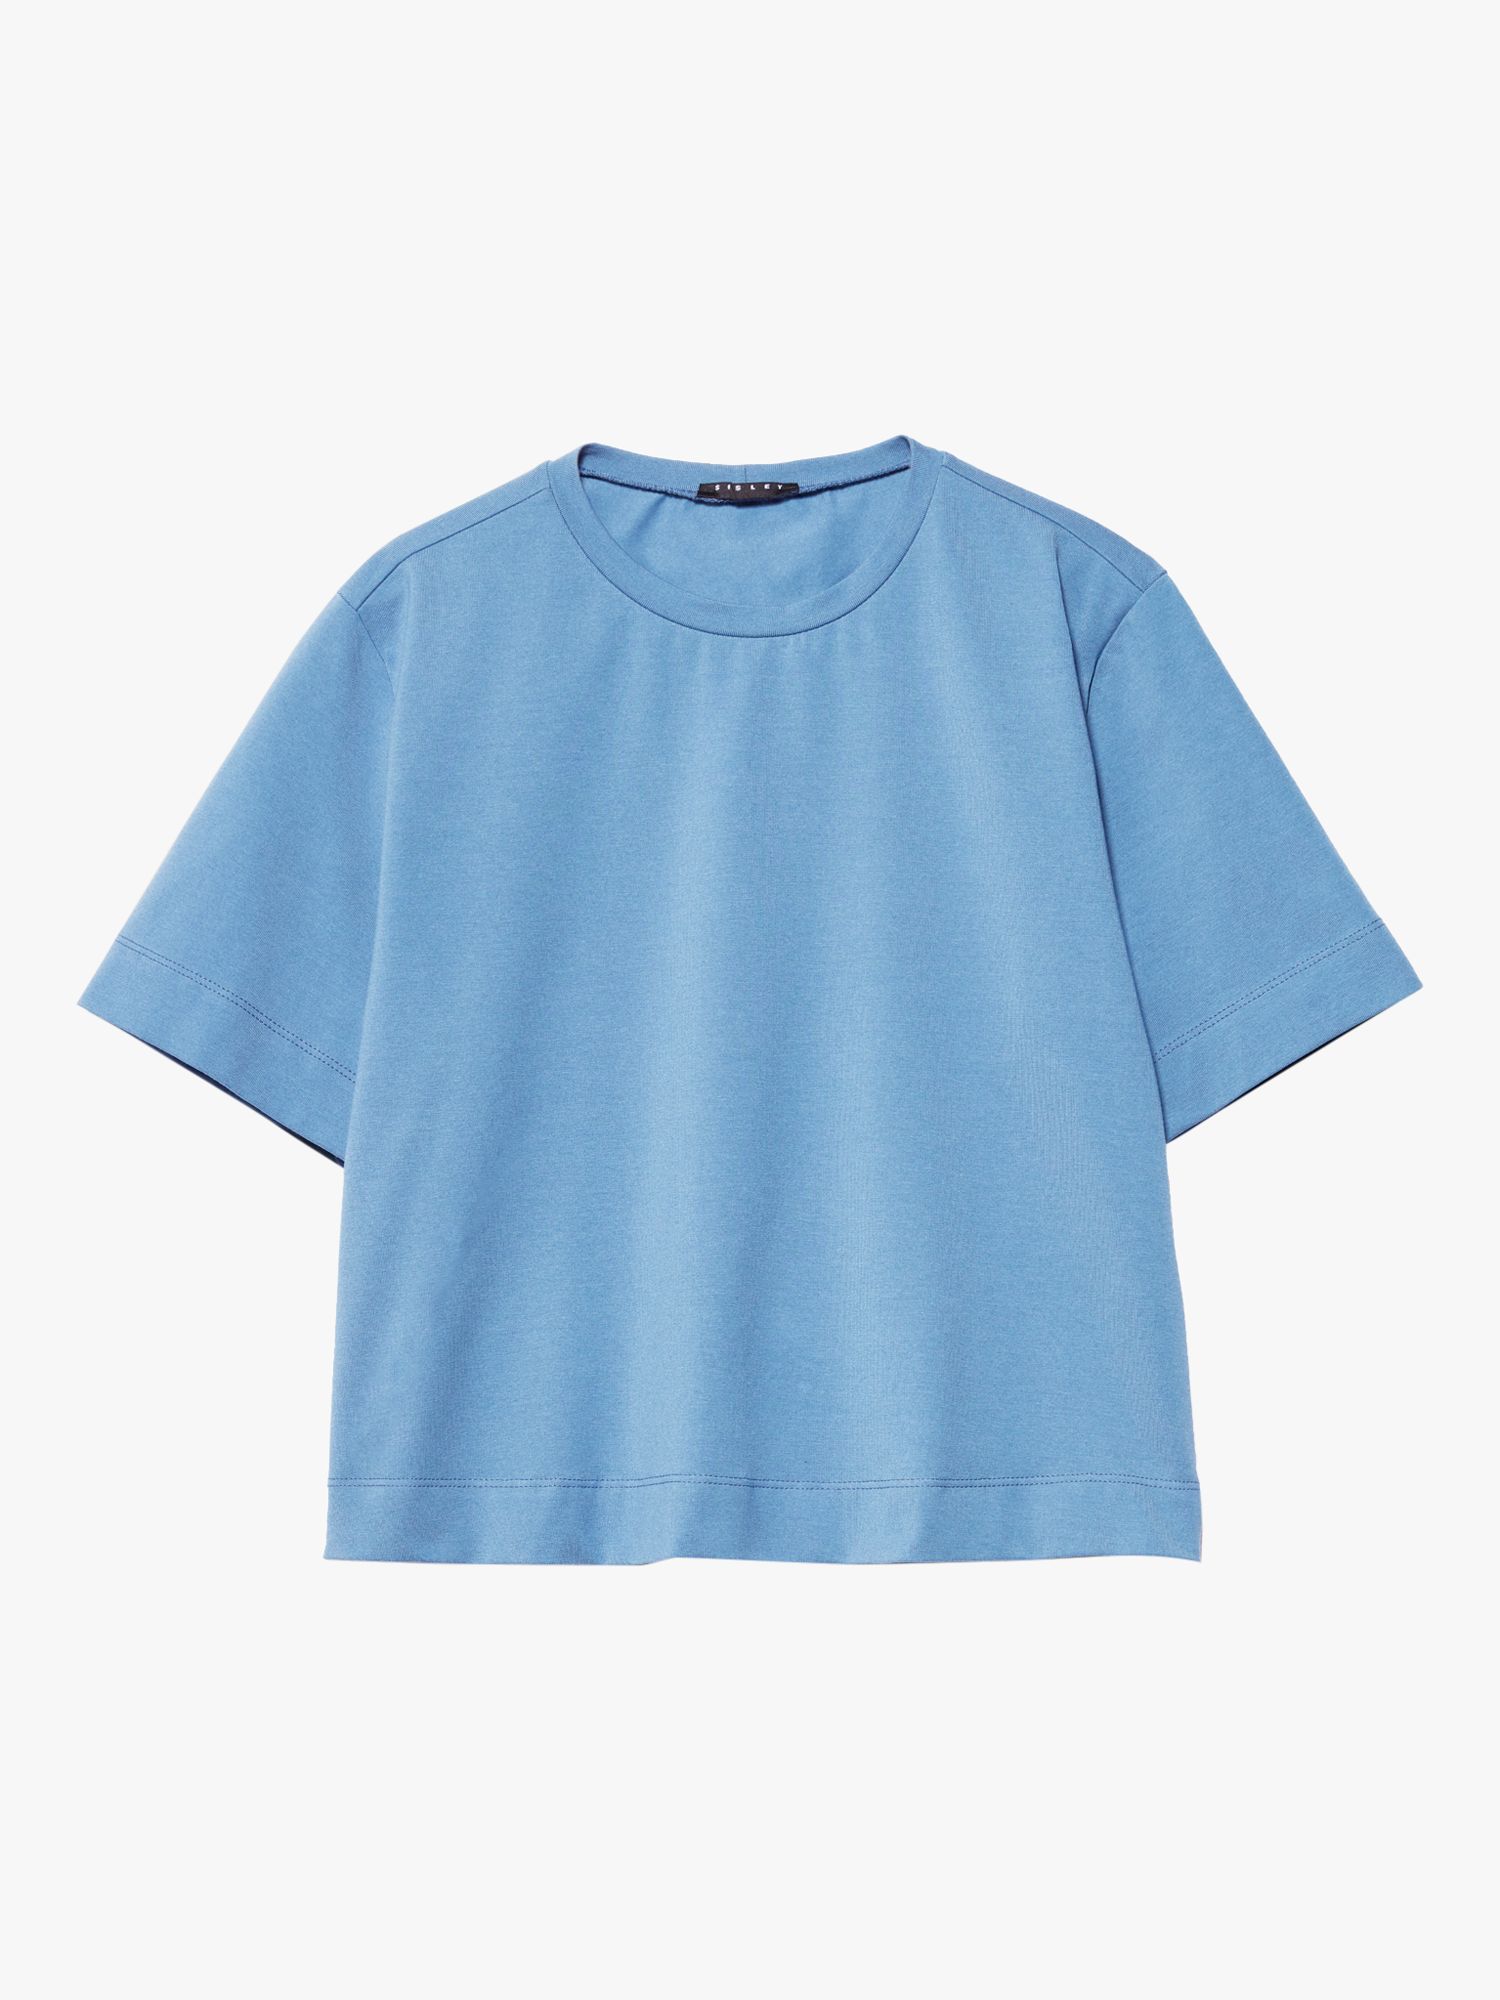 Buy SISLEY Boxy Fit Stretch Organic Cotton T-Shirt, Blue Online at johnlewis.com